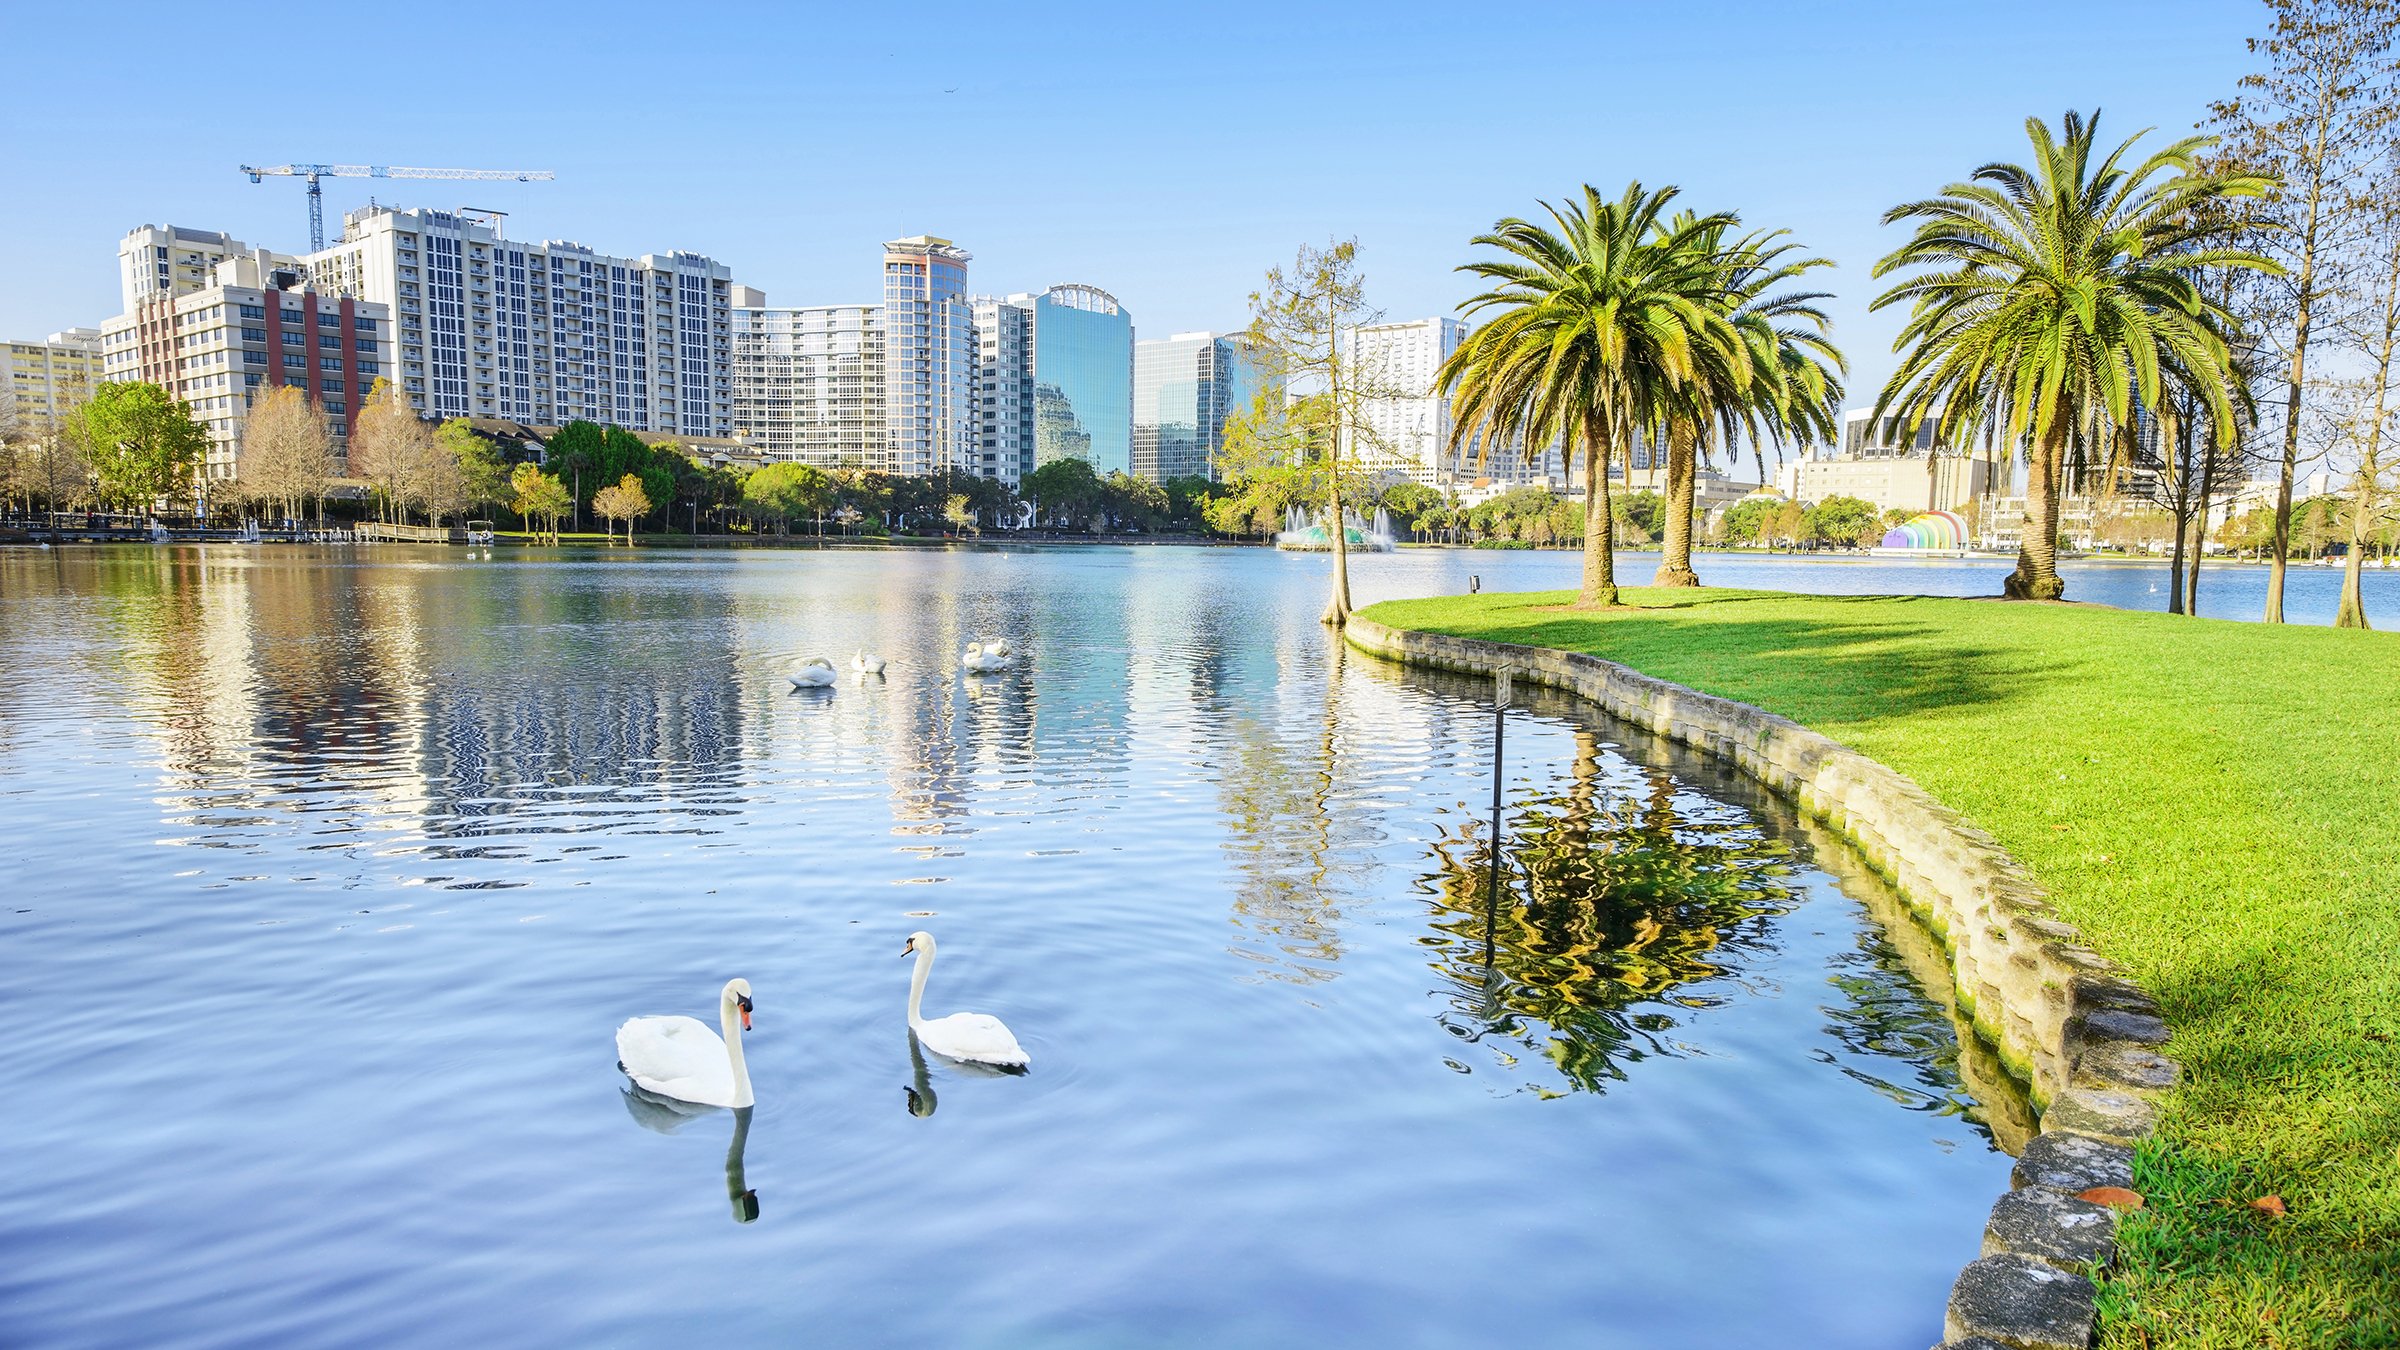 Lake Eola Park in Orlando, Florida displaying white swans in the water and skyline in the background.